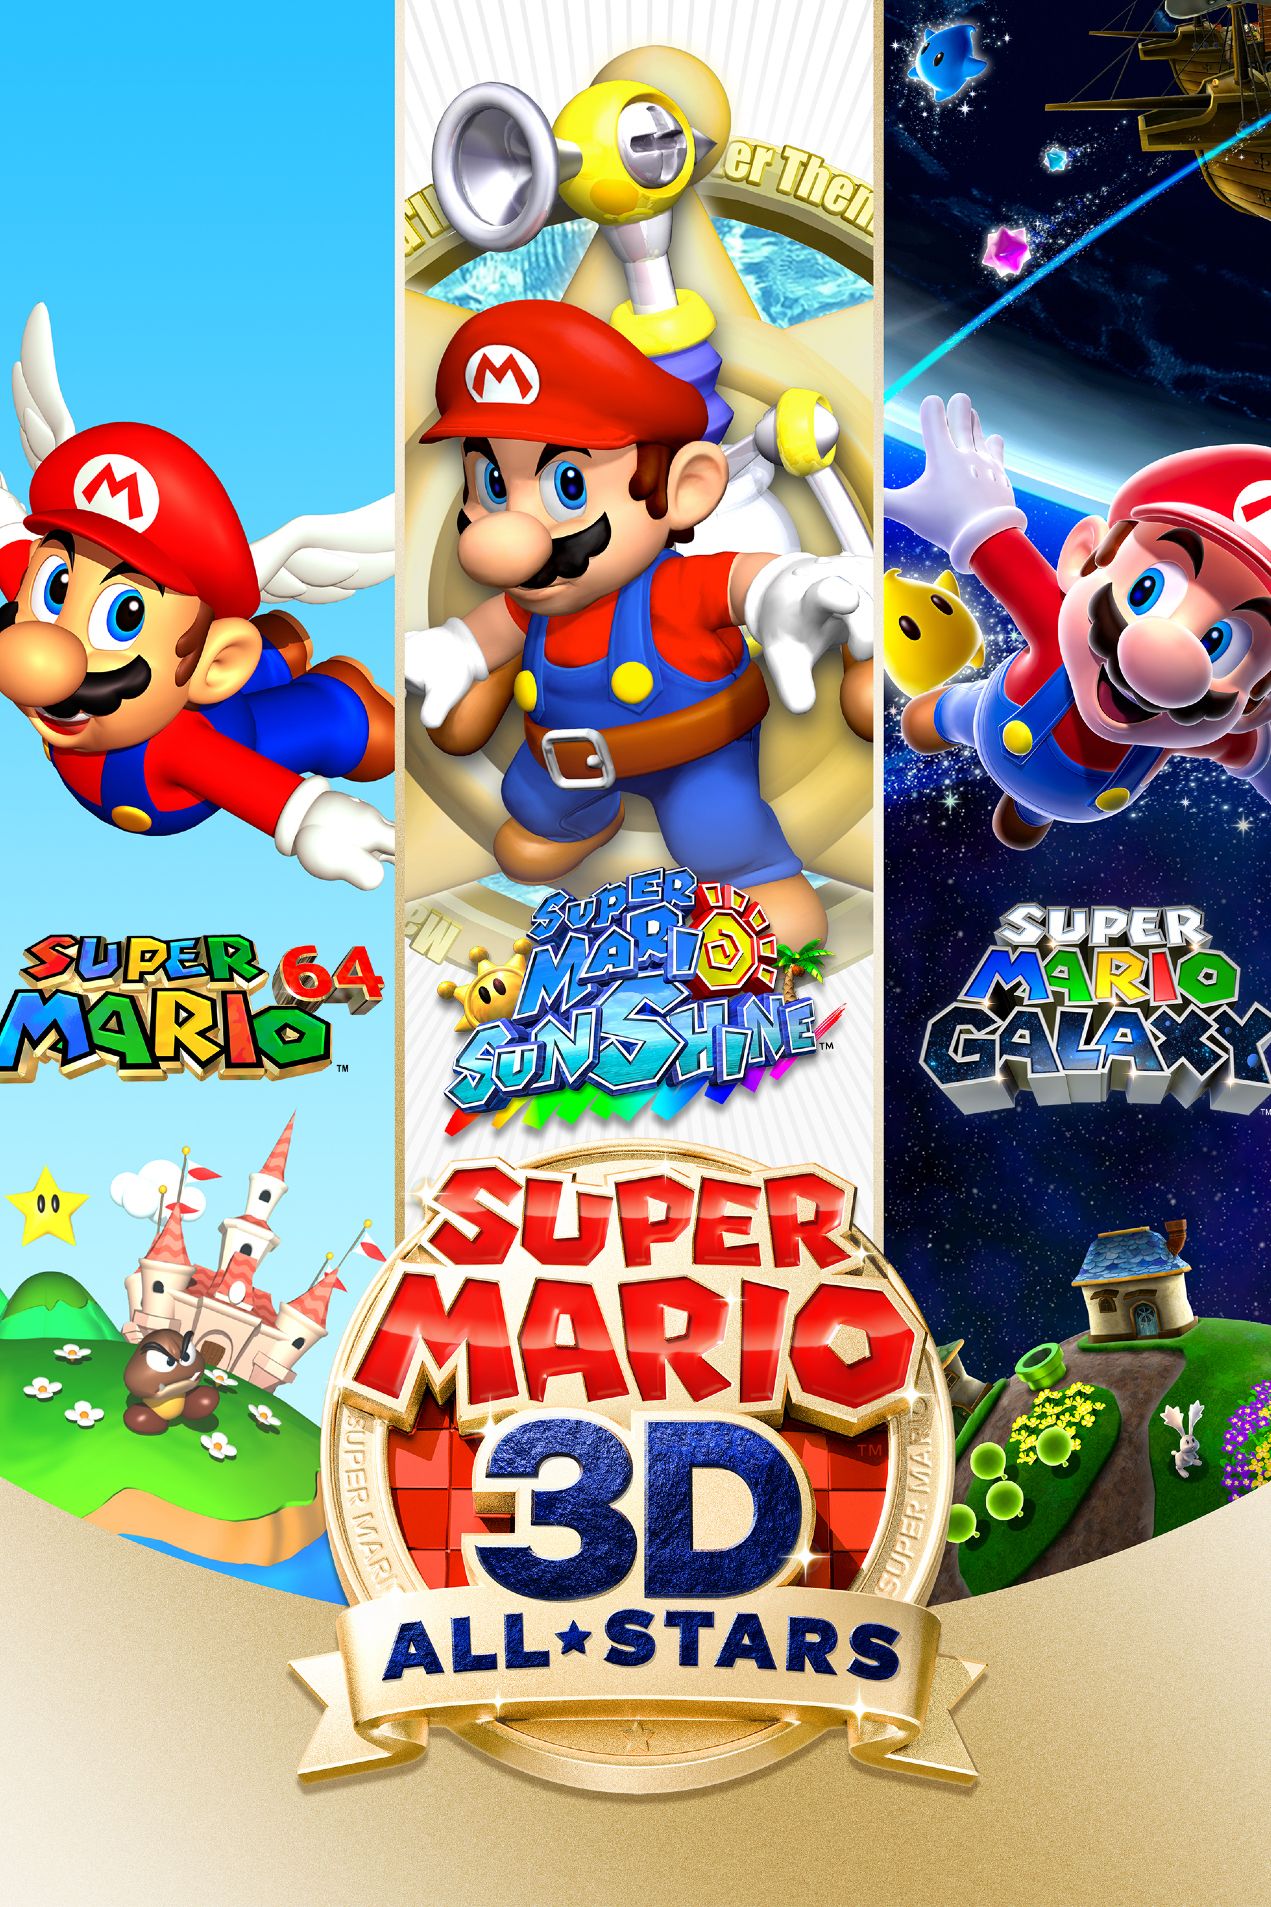 Super Mario 3D All-Stars Game Poster